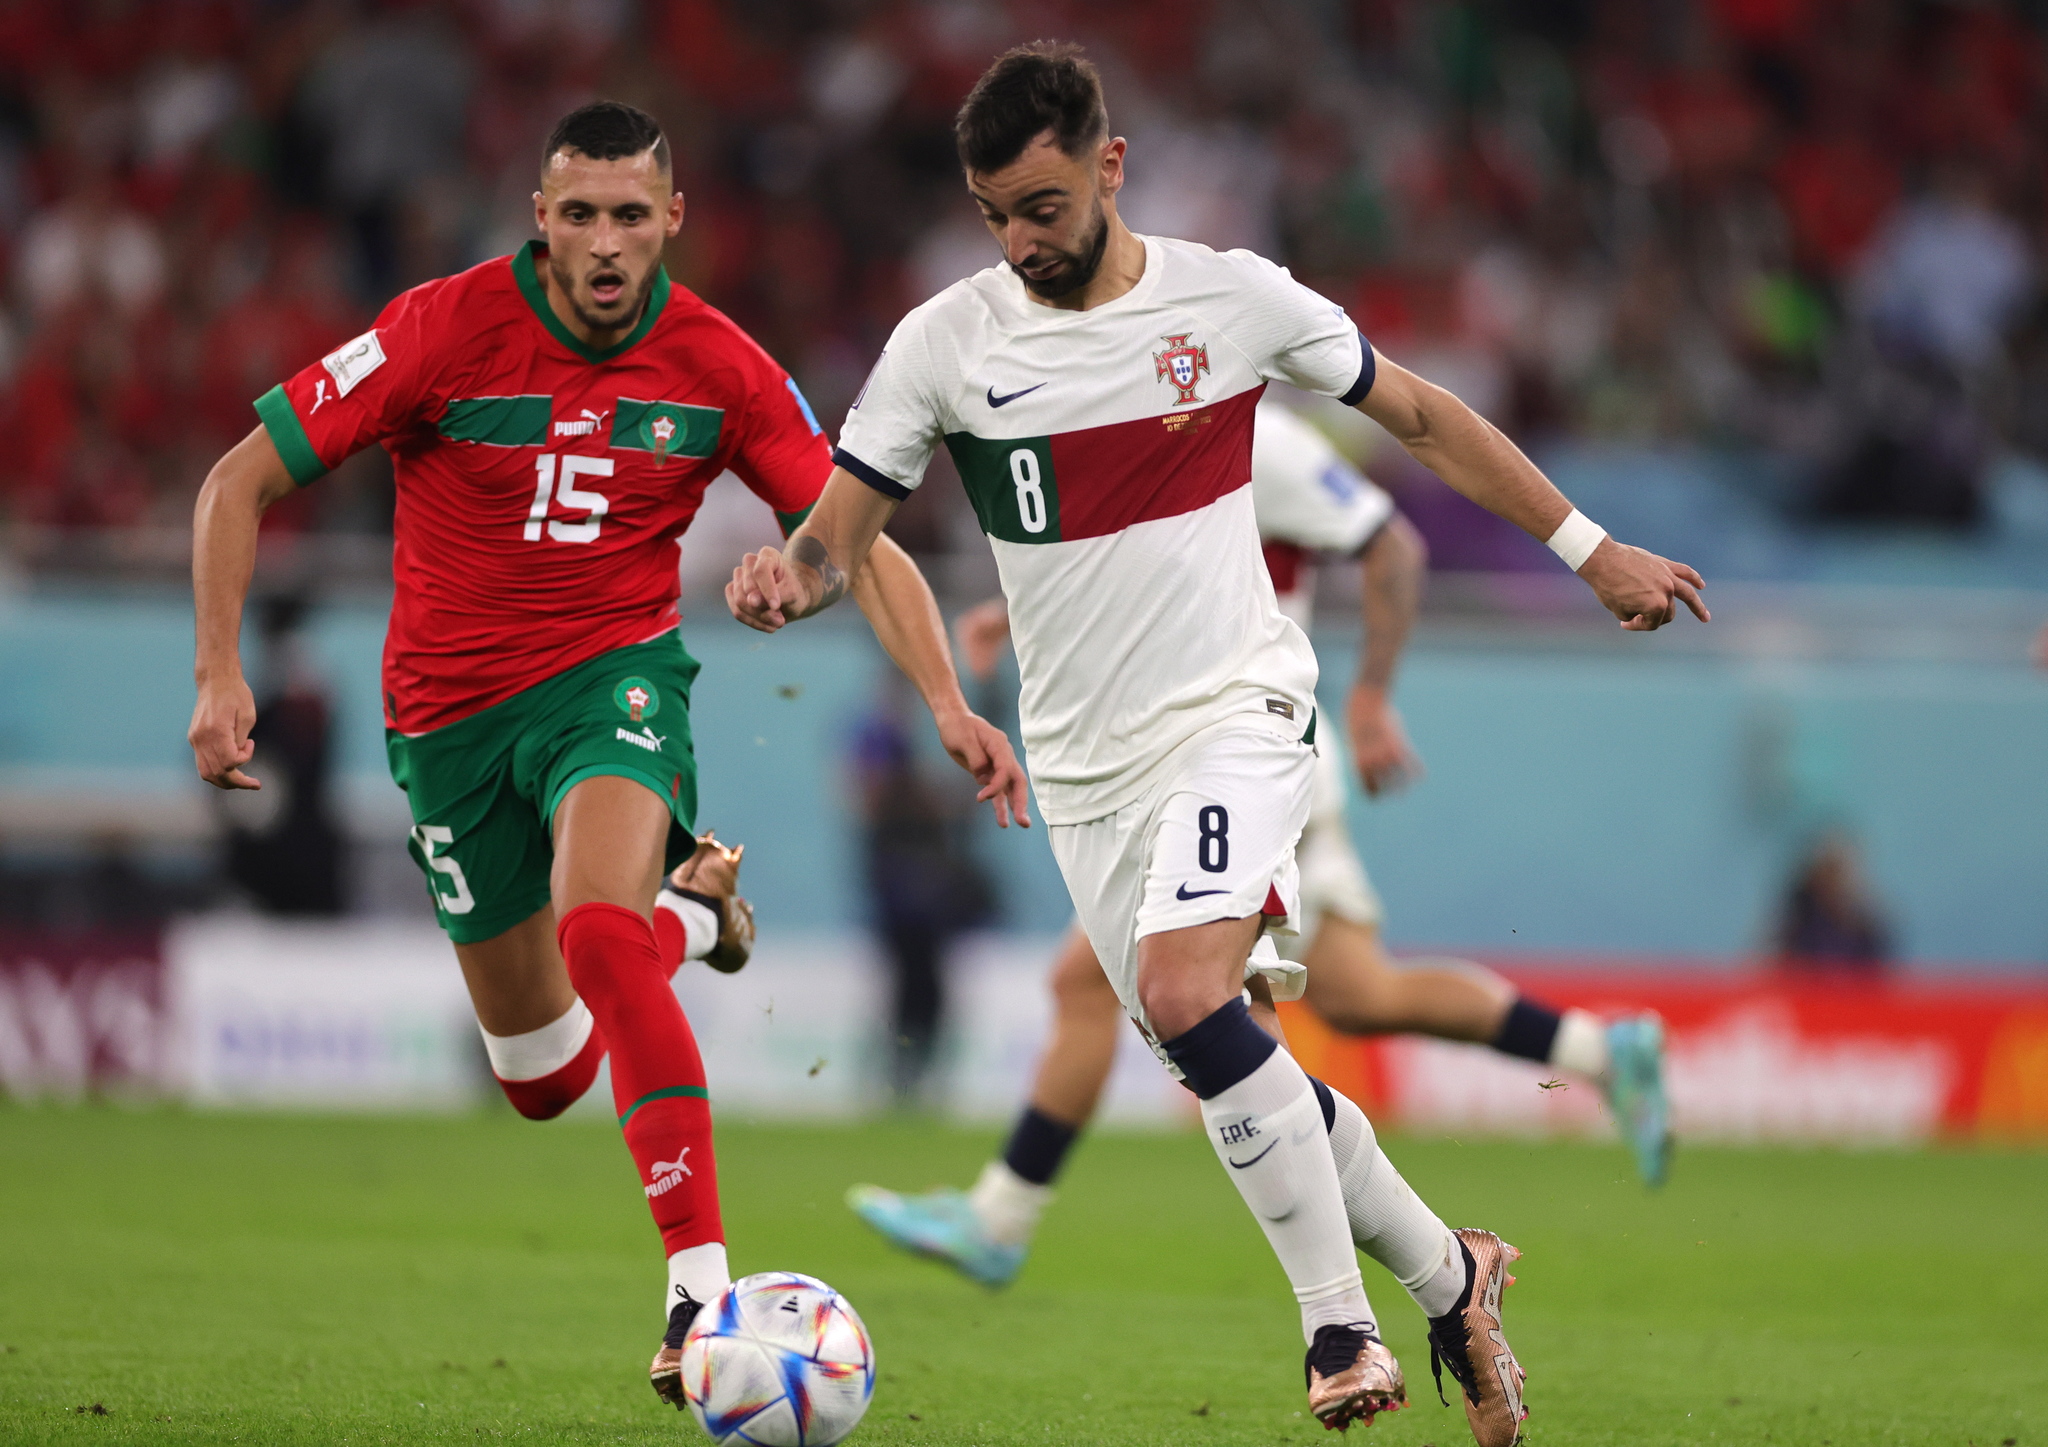 Doha (Qatar), 10/12/2022.- Selim Amallah (L) of Morocco in action against Bruno Fernandes of  lt;HIT gt;Portugal lt;/HIT gt; during the FIFA World Cup 2022 quarter final soccer match between Morocco and  lt;HIT gt;Portugal lt;/HIT gt; at Al Thumama Stadium in Doha, Qatar, 10 December 2022. (Mundial de Fútbol, Marruecos, Catar) EFE/EPA/Abir Sultan